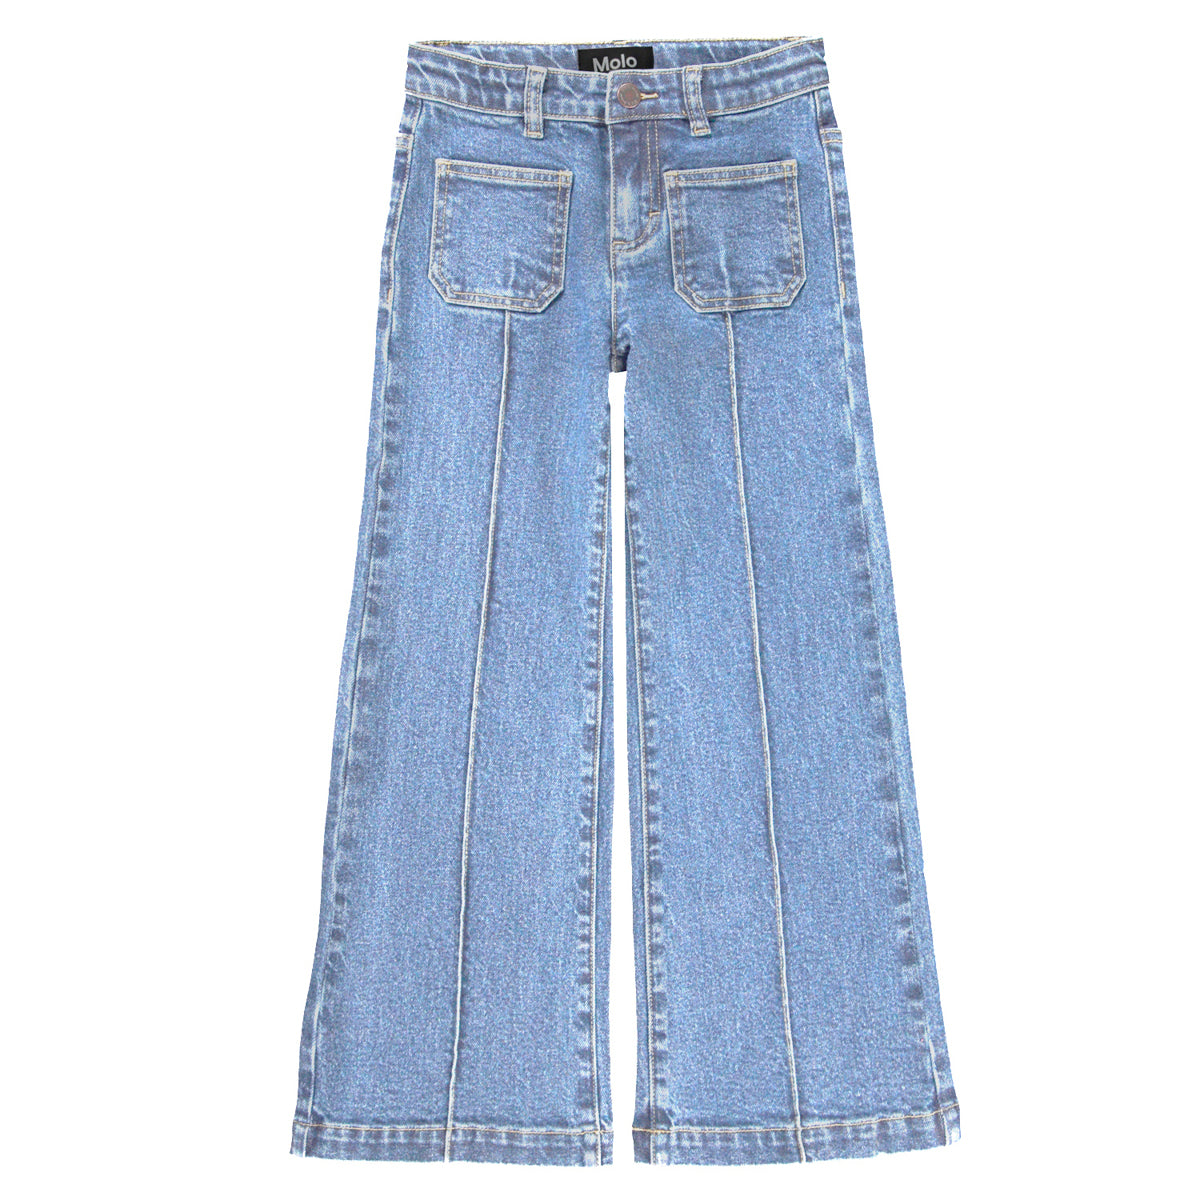 The Adina Denim Pants from Molo. Blue, 70's flared leg jeans with a stitched press fold. 